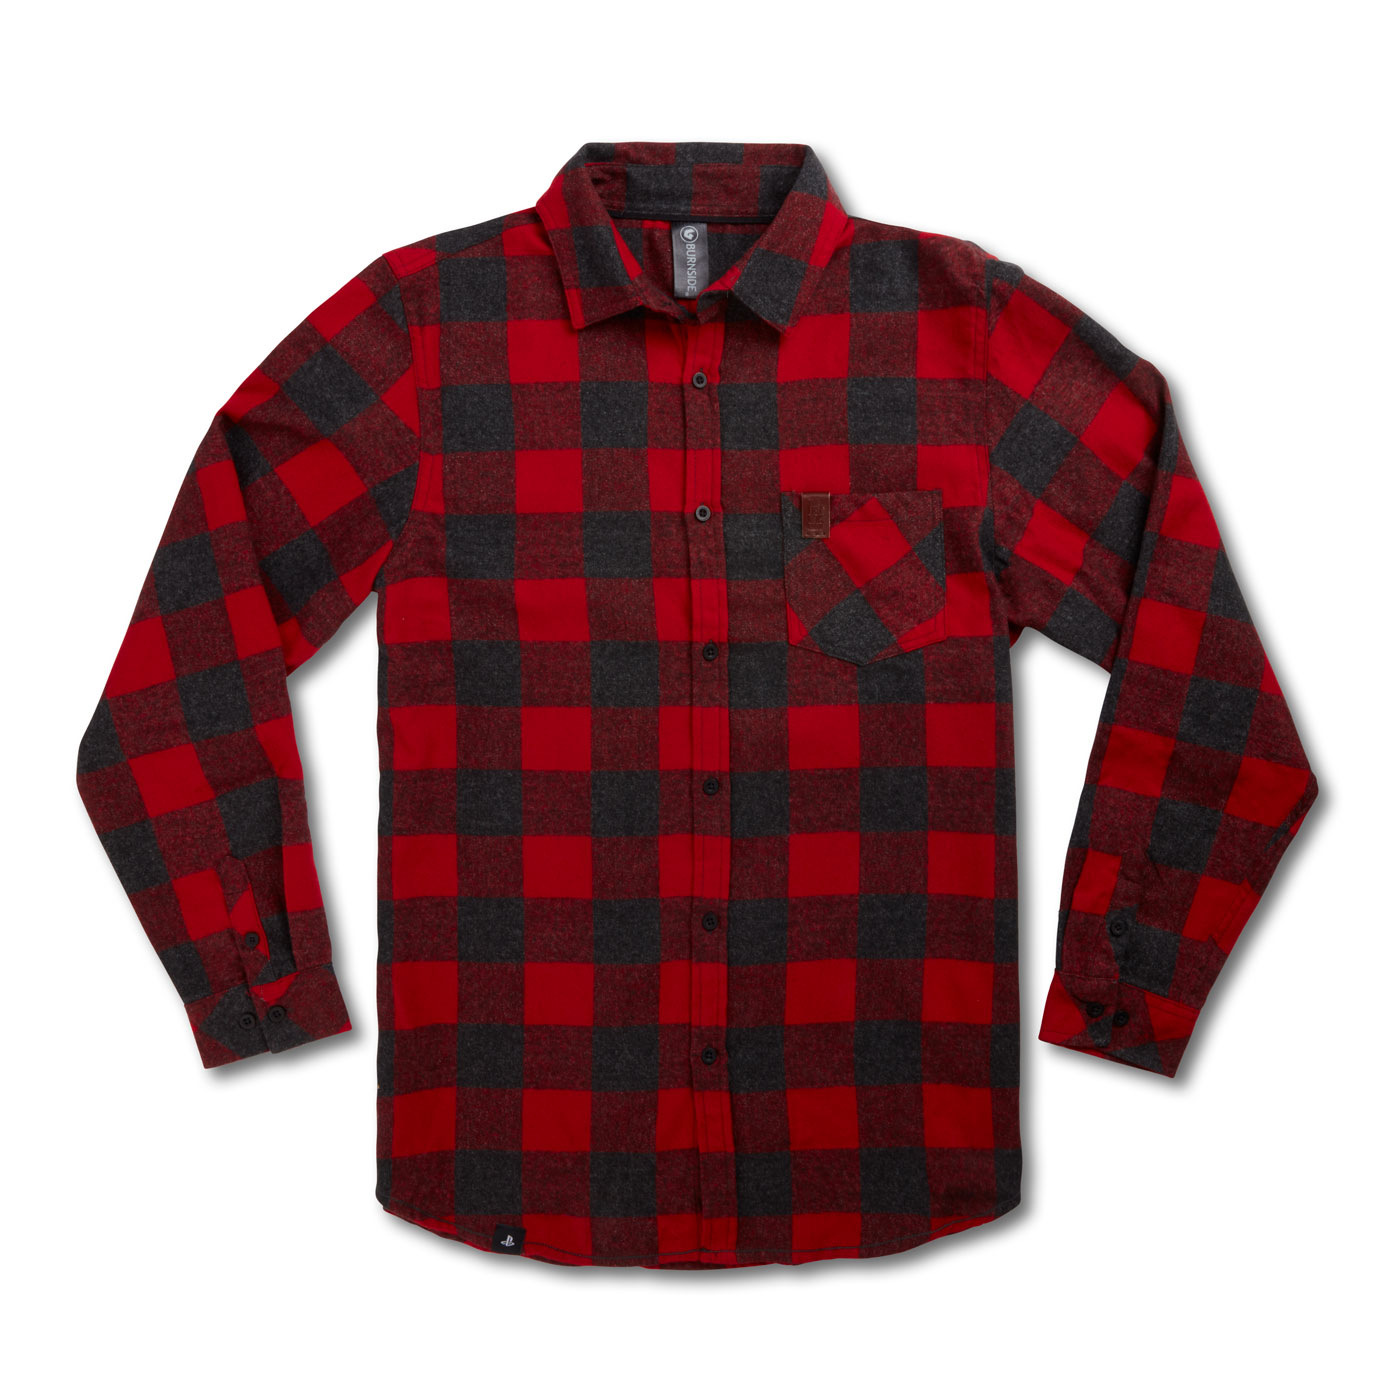 The Last of Us Part II Burnside Woven Plaid Flannel | PlayStation Gear